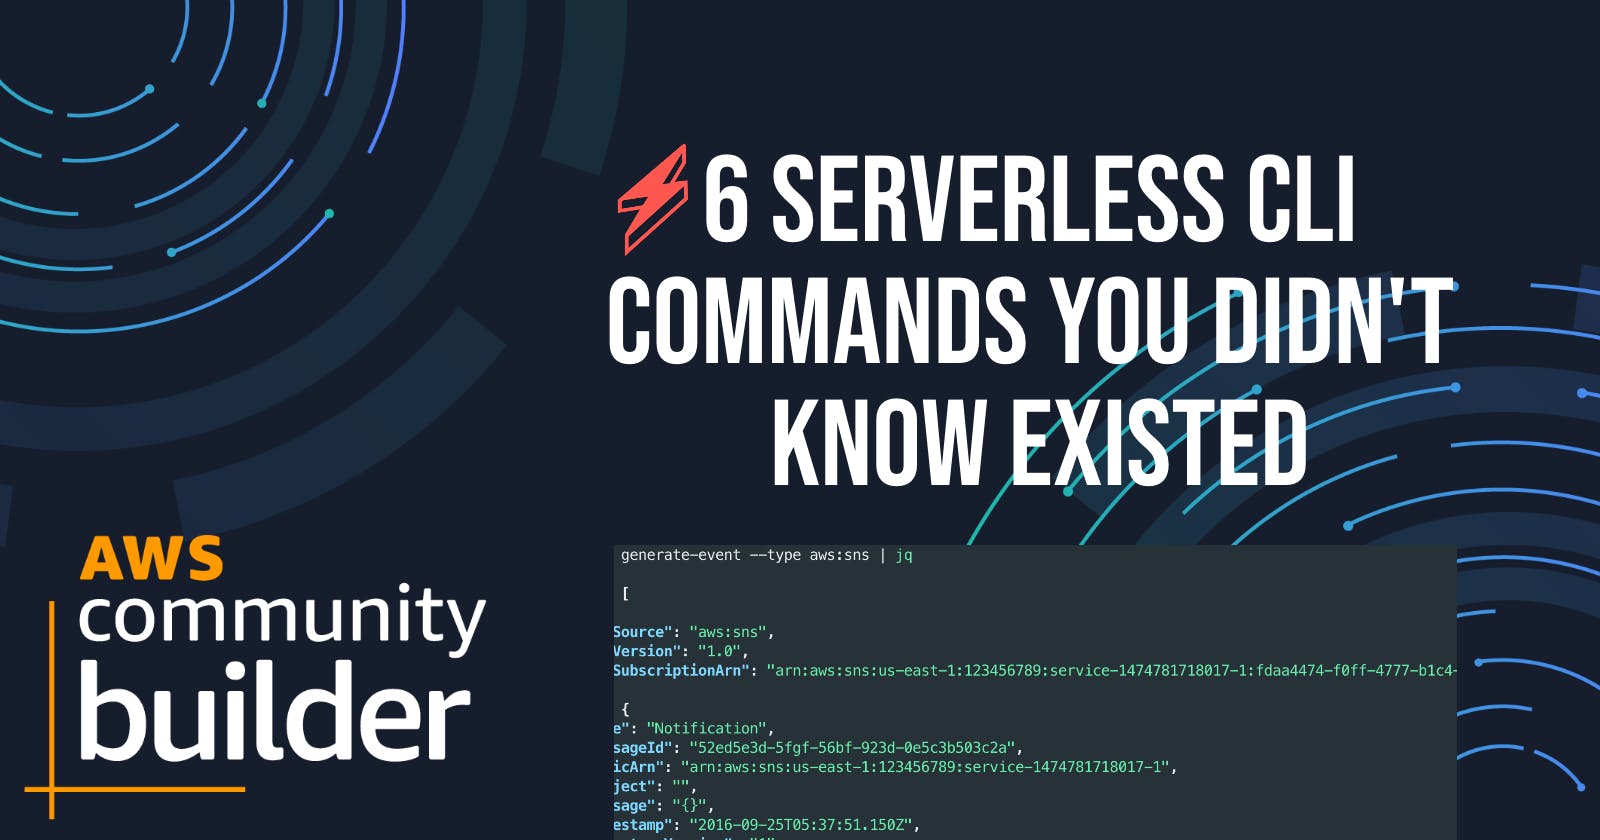 ⚡️ 6 Serverless CLI Commands You Didn't Know Existed